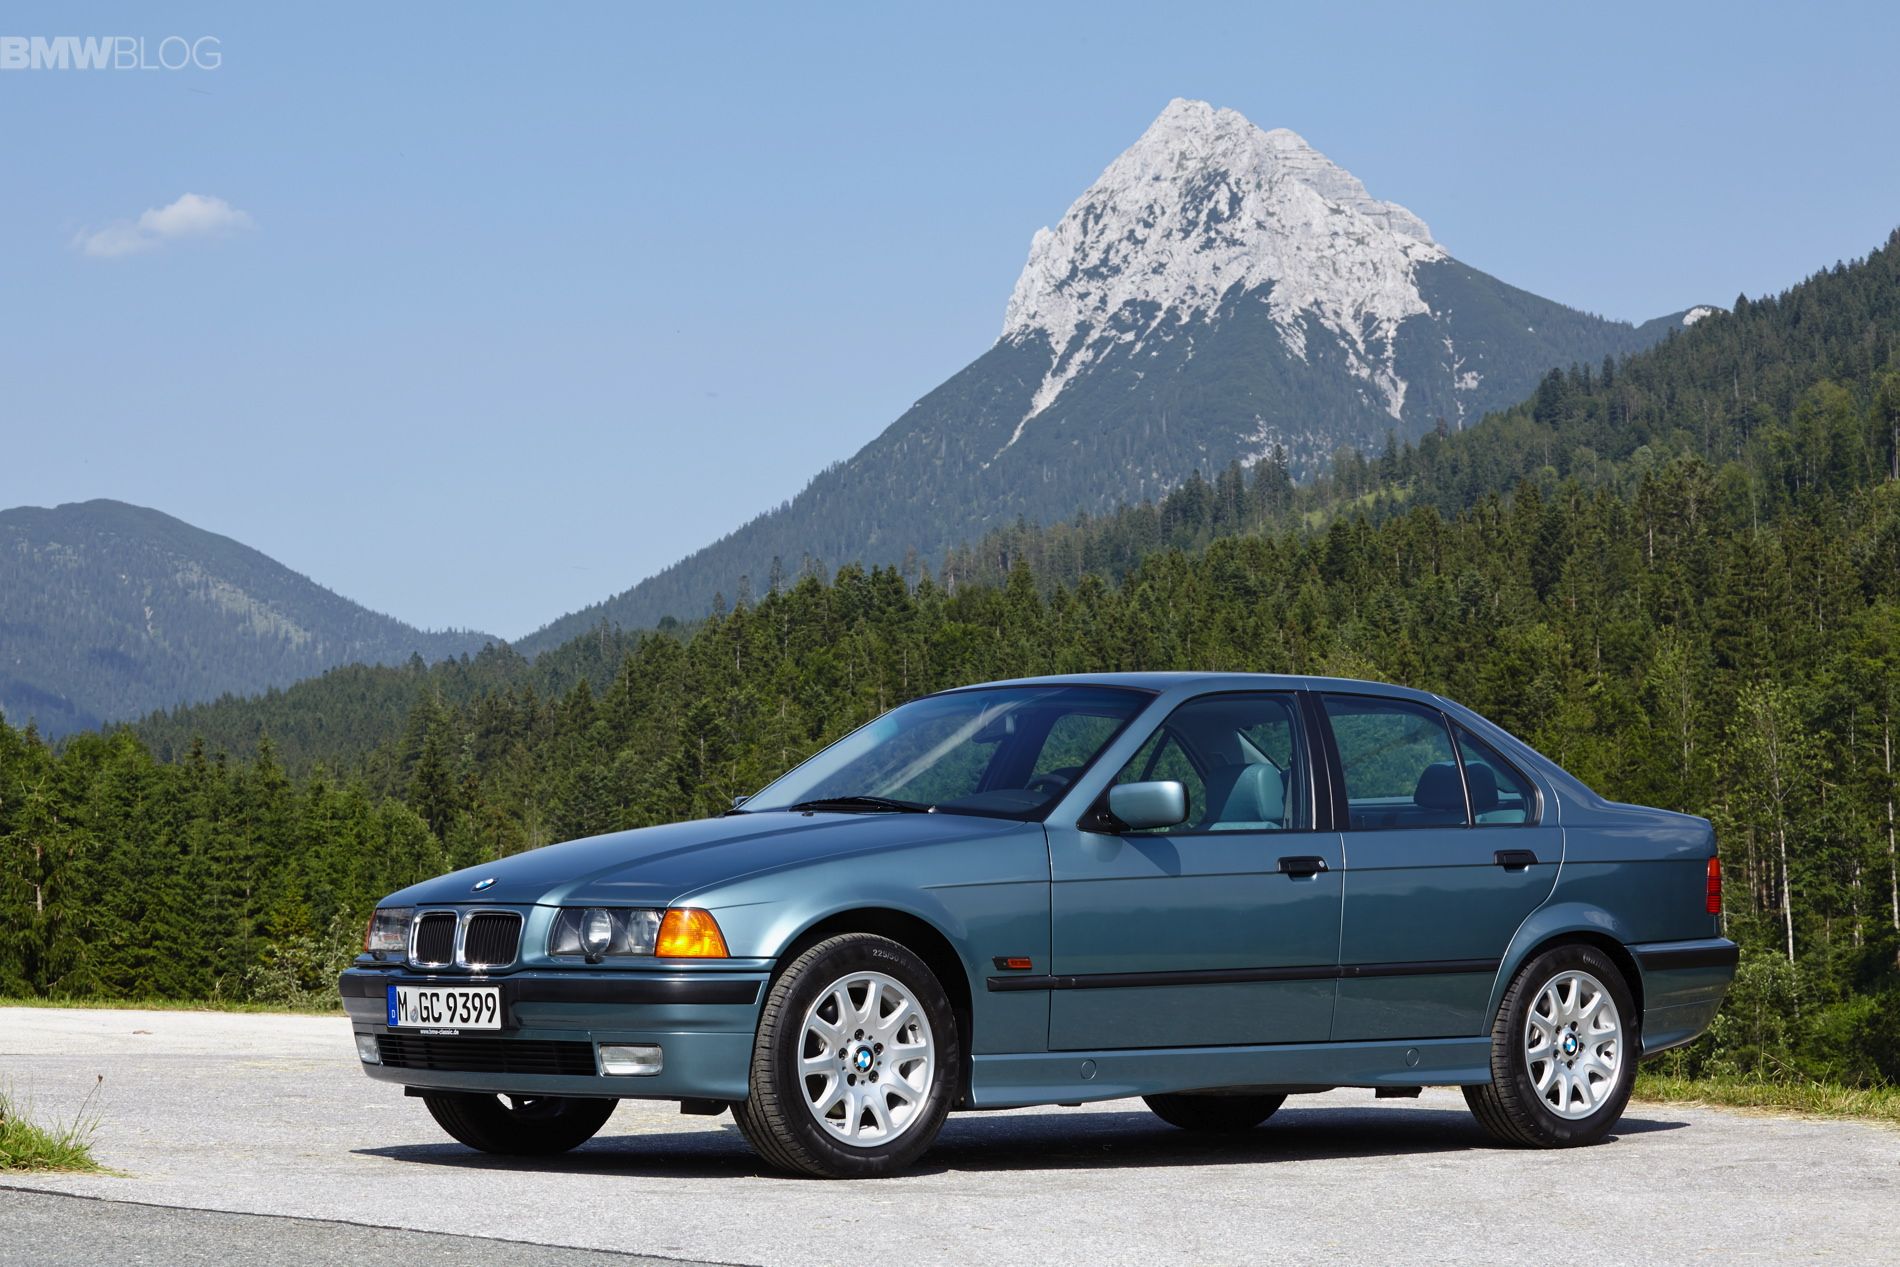 Blue 1998 BMW 3-series E36 with mountains in the background